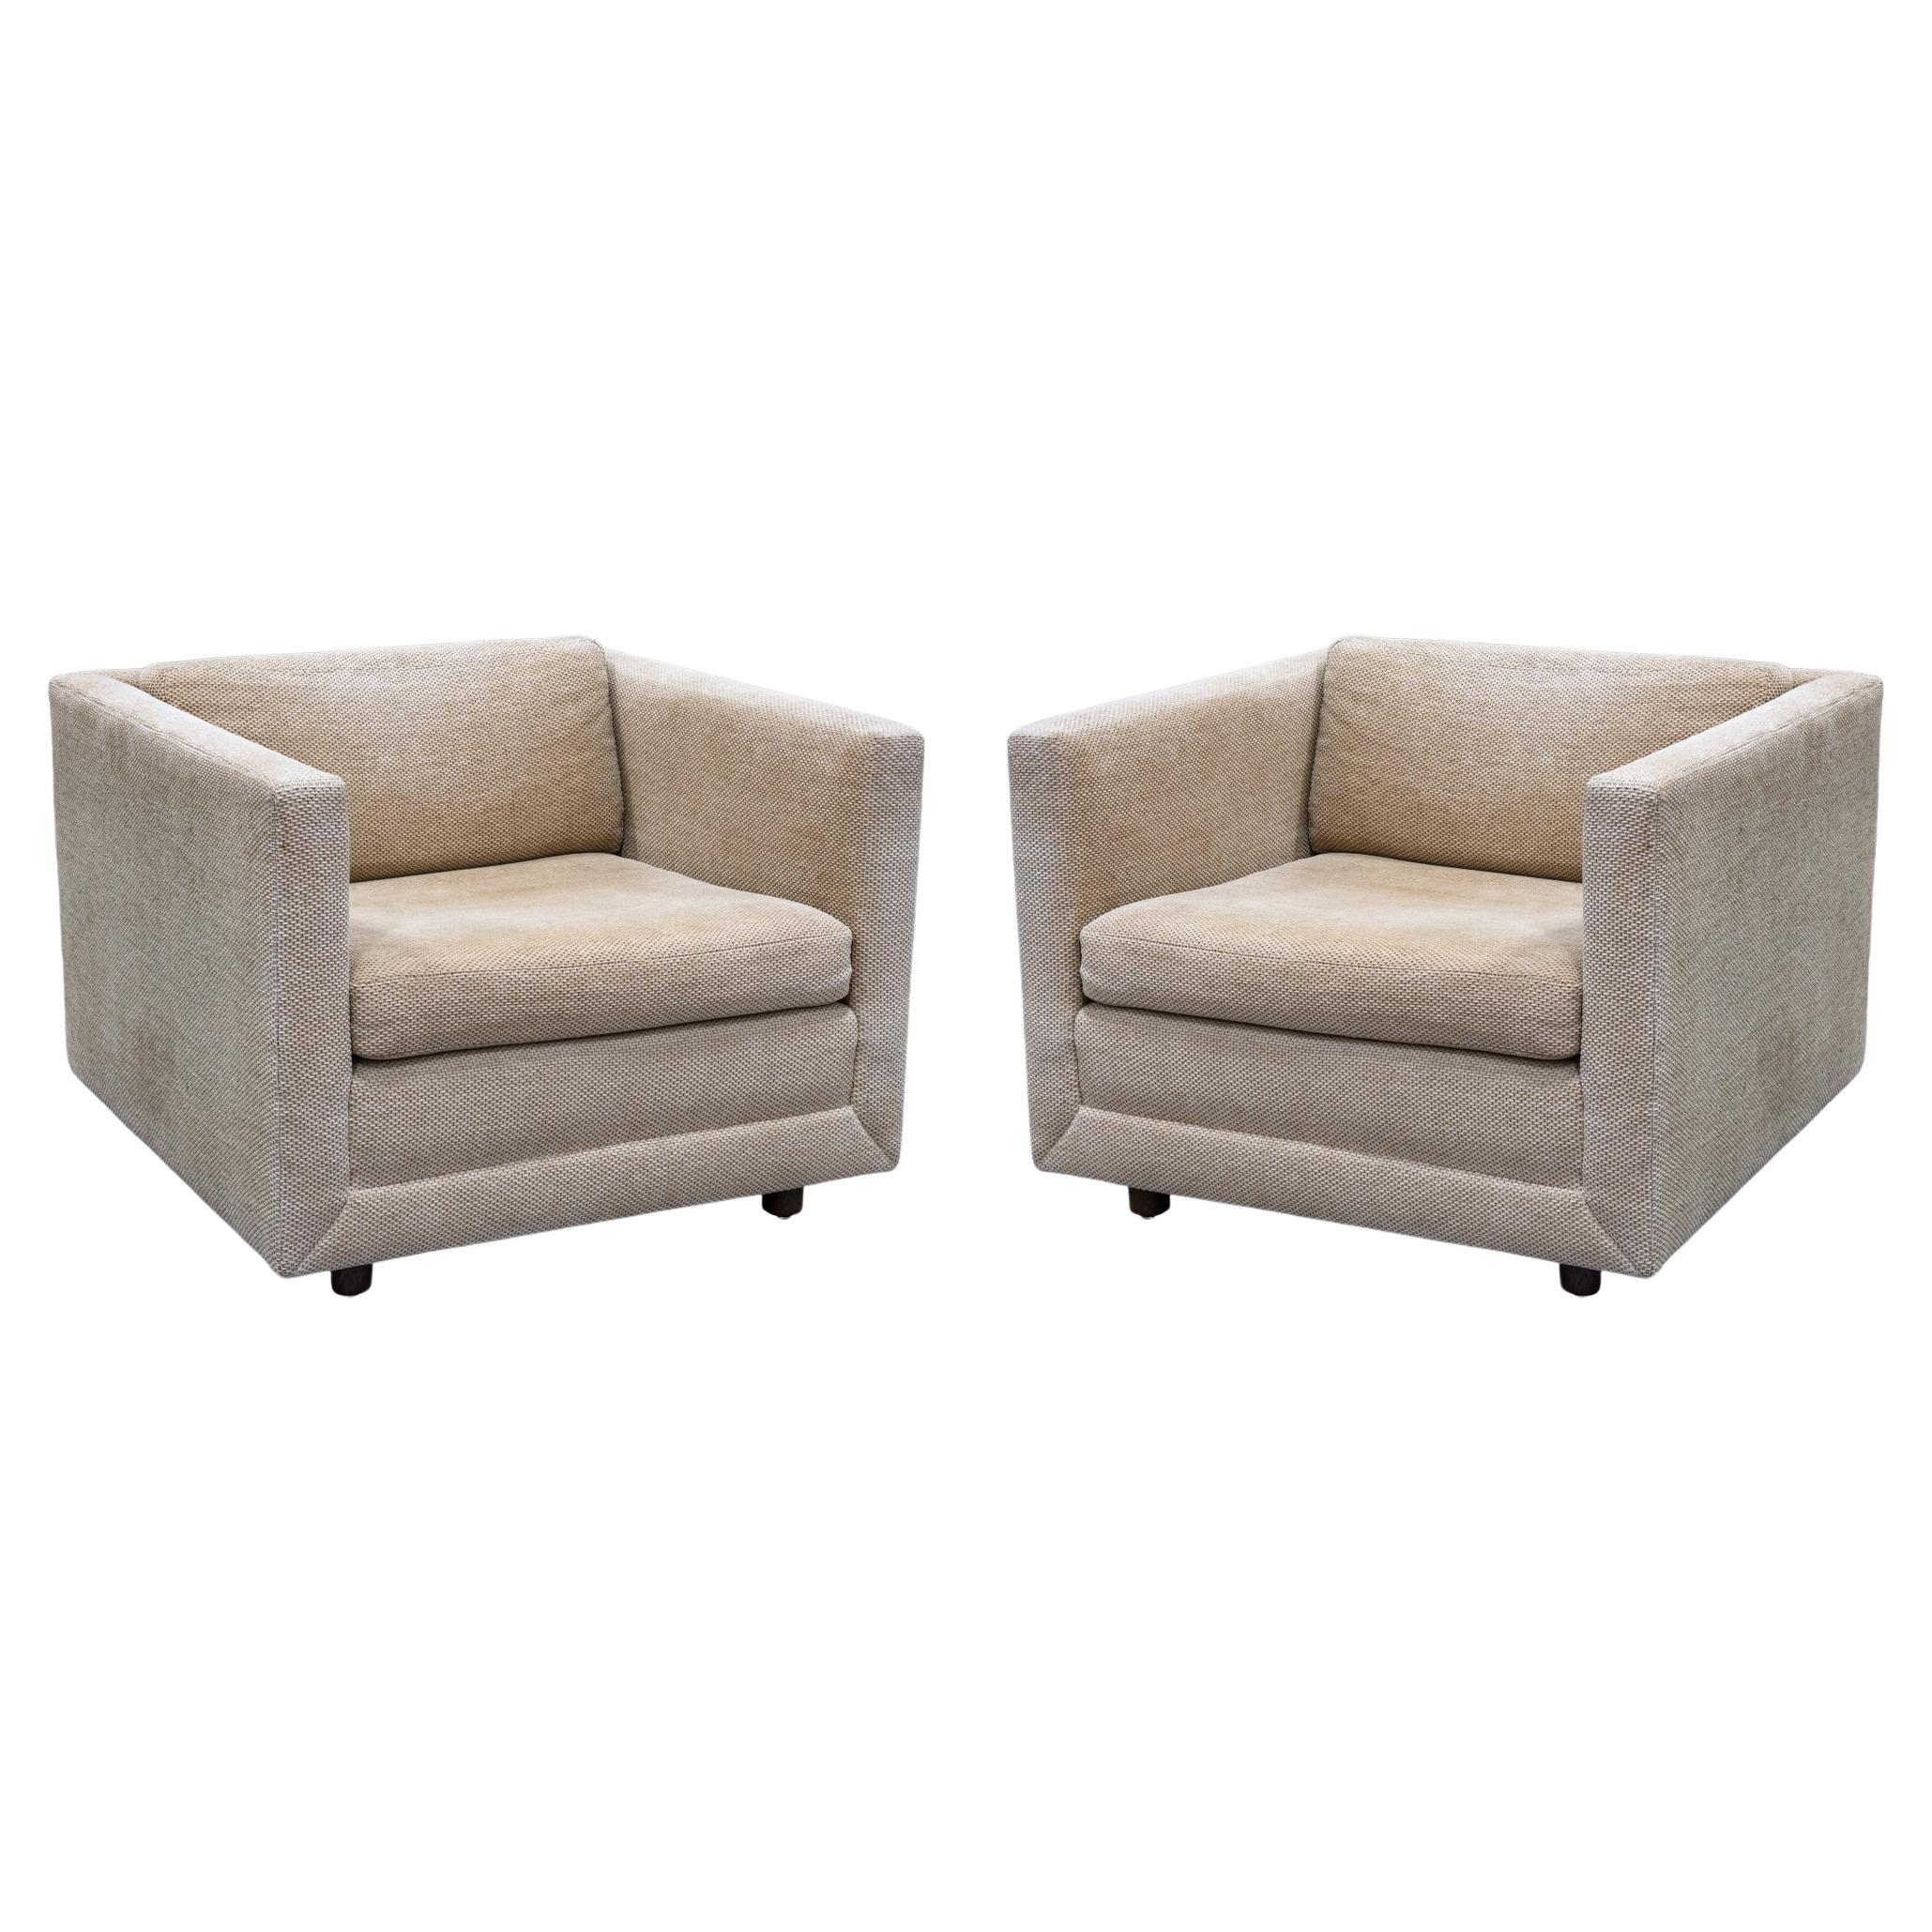 Pair of Tan Brickell Cube Accent Lounge Chairs with Wooden Legs For Sale